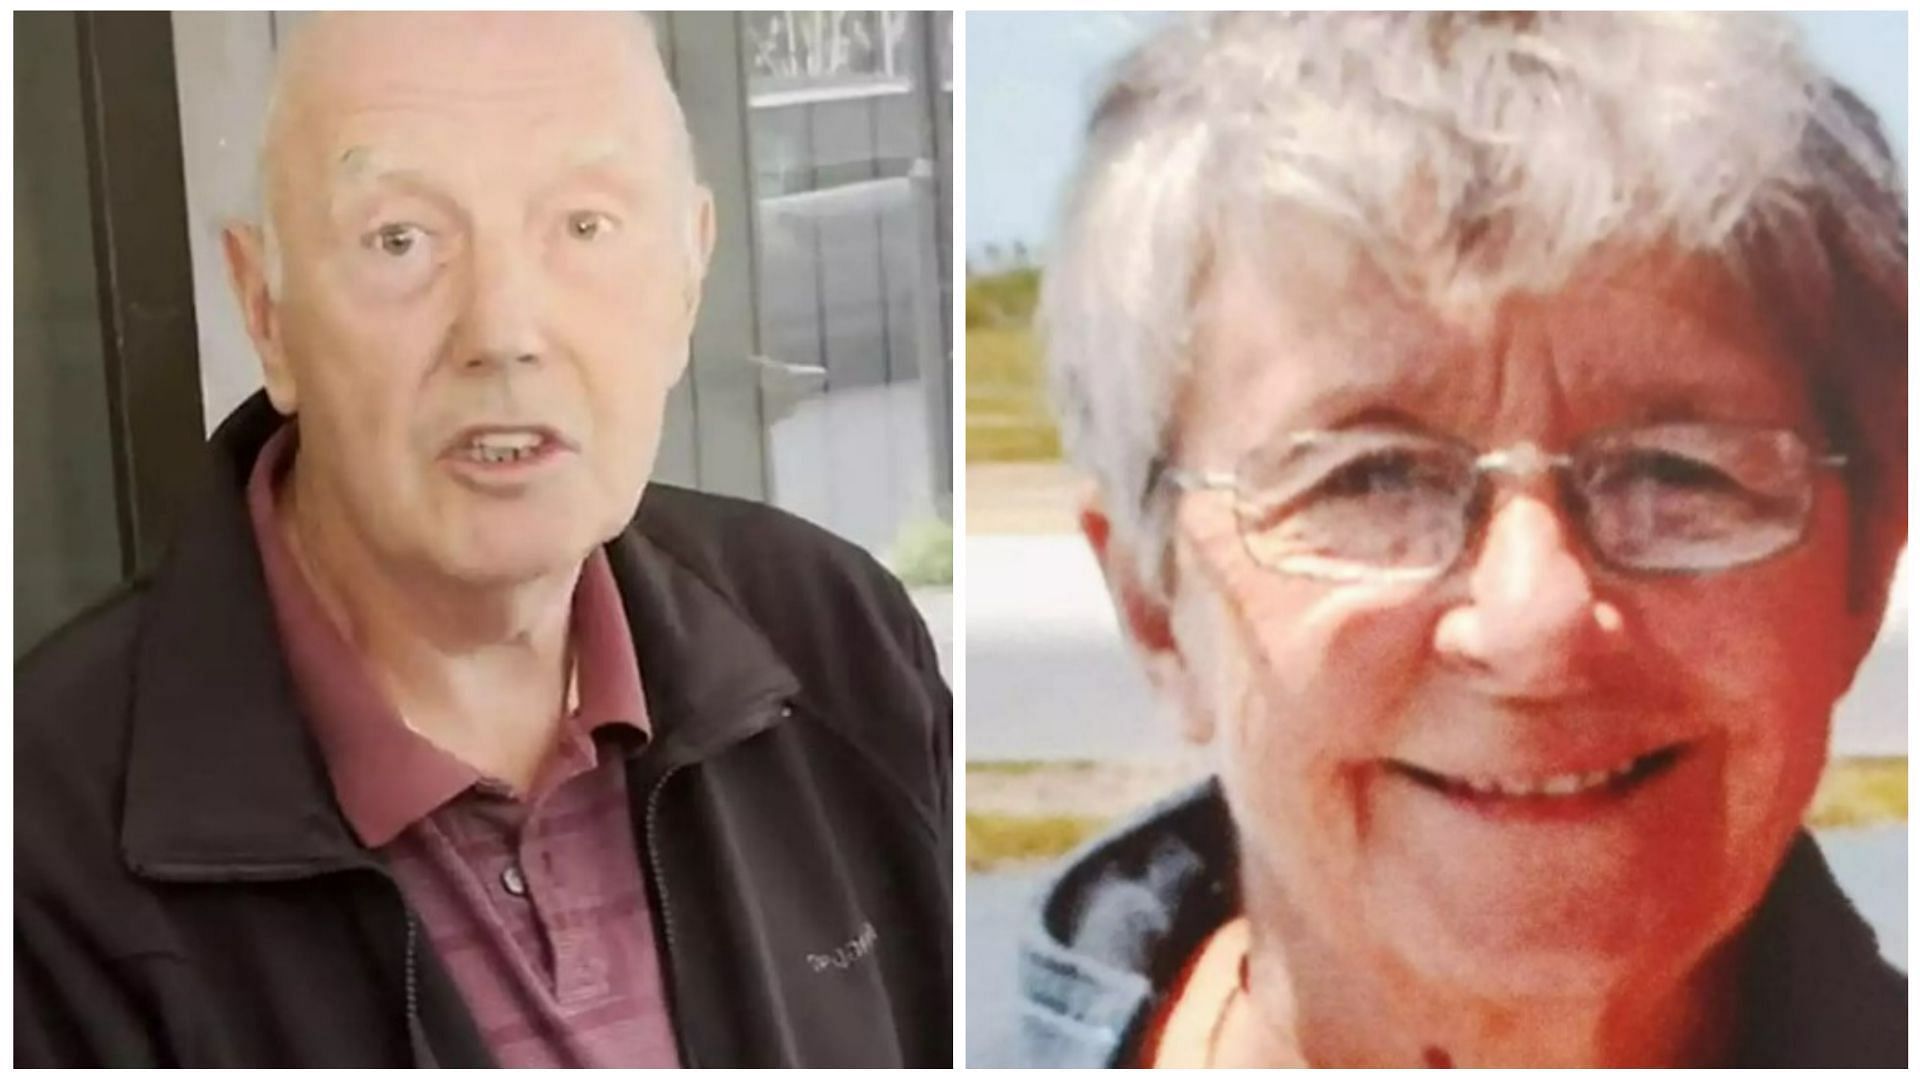 Graham claims he killed his terminally ill wife out of love (Images via Alamy Stock Photo/Greater Manchester Police)